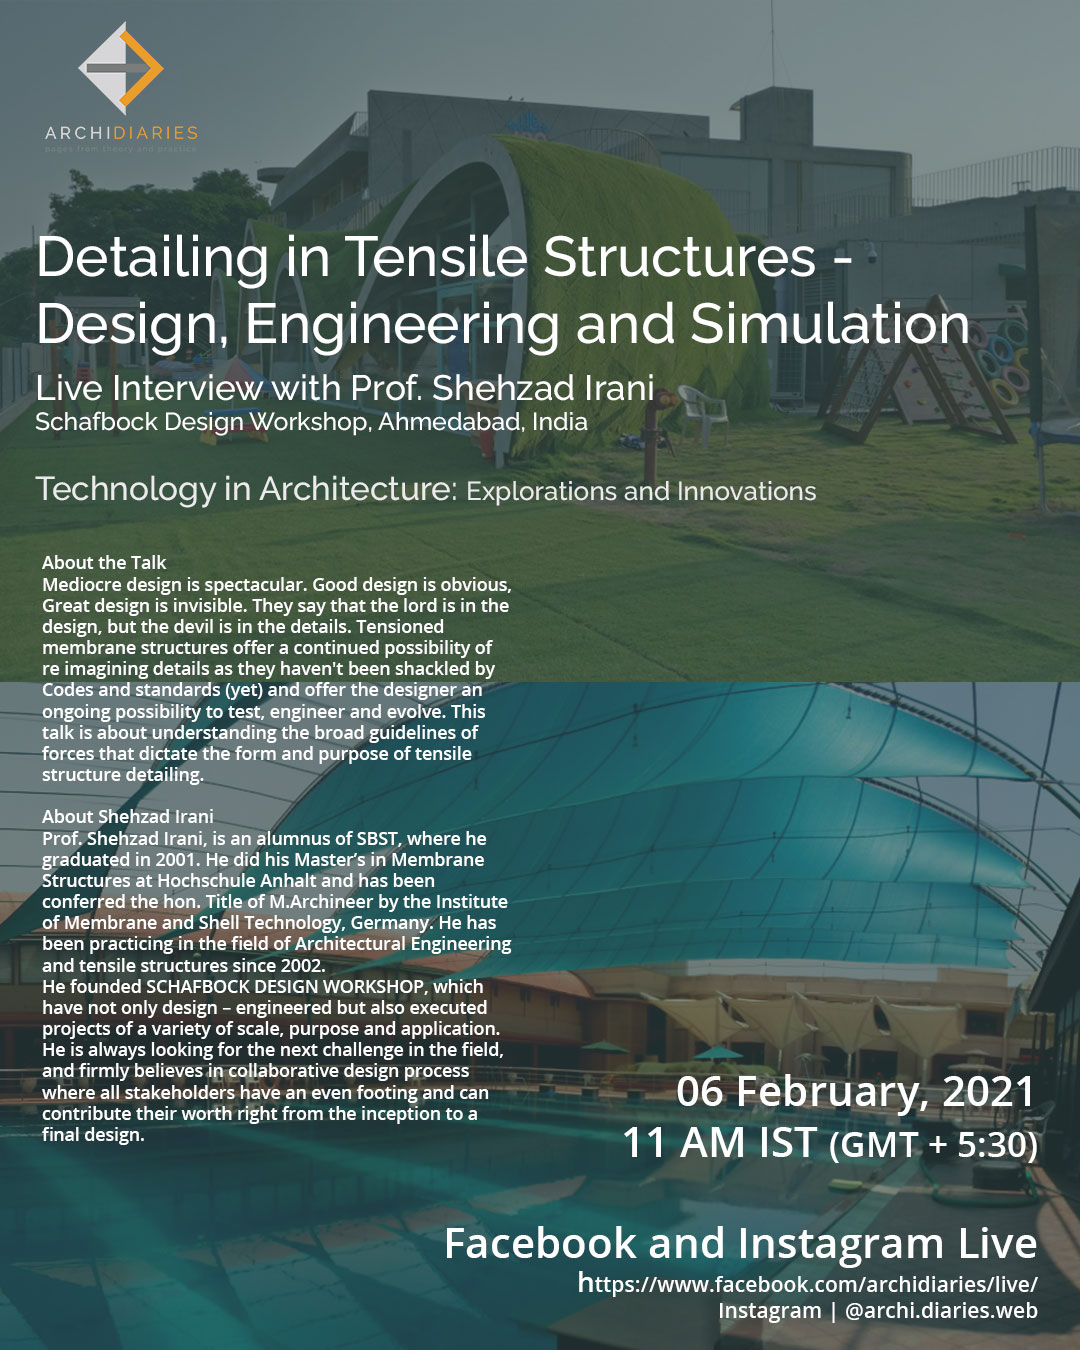 Technology In Architecture: Detailing in Tensile Structures - Design, Engineering and Simulation: Interview with Shehzad Irani